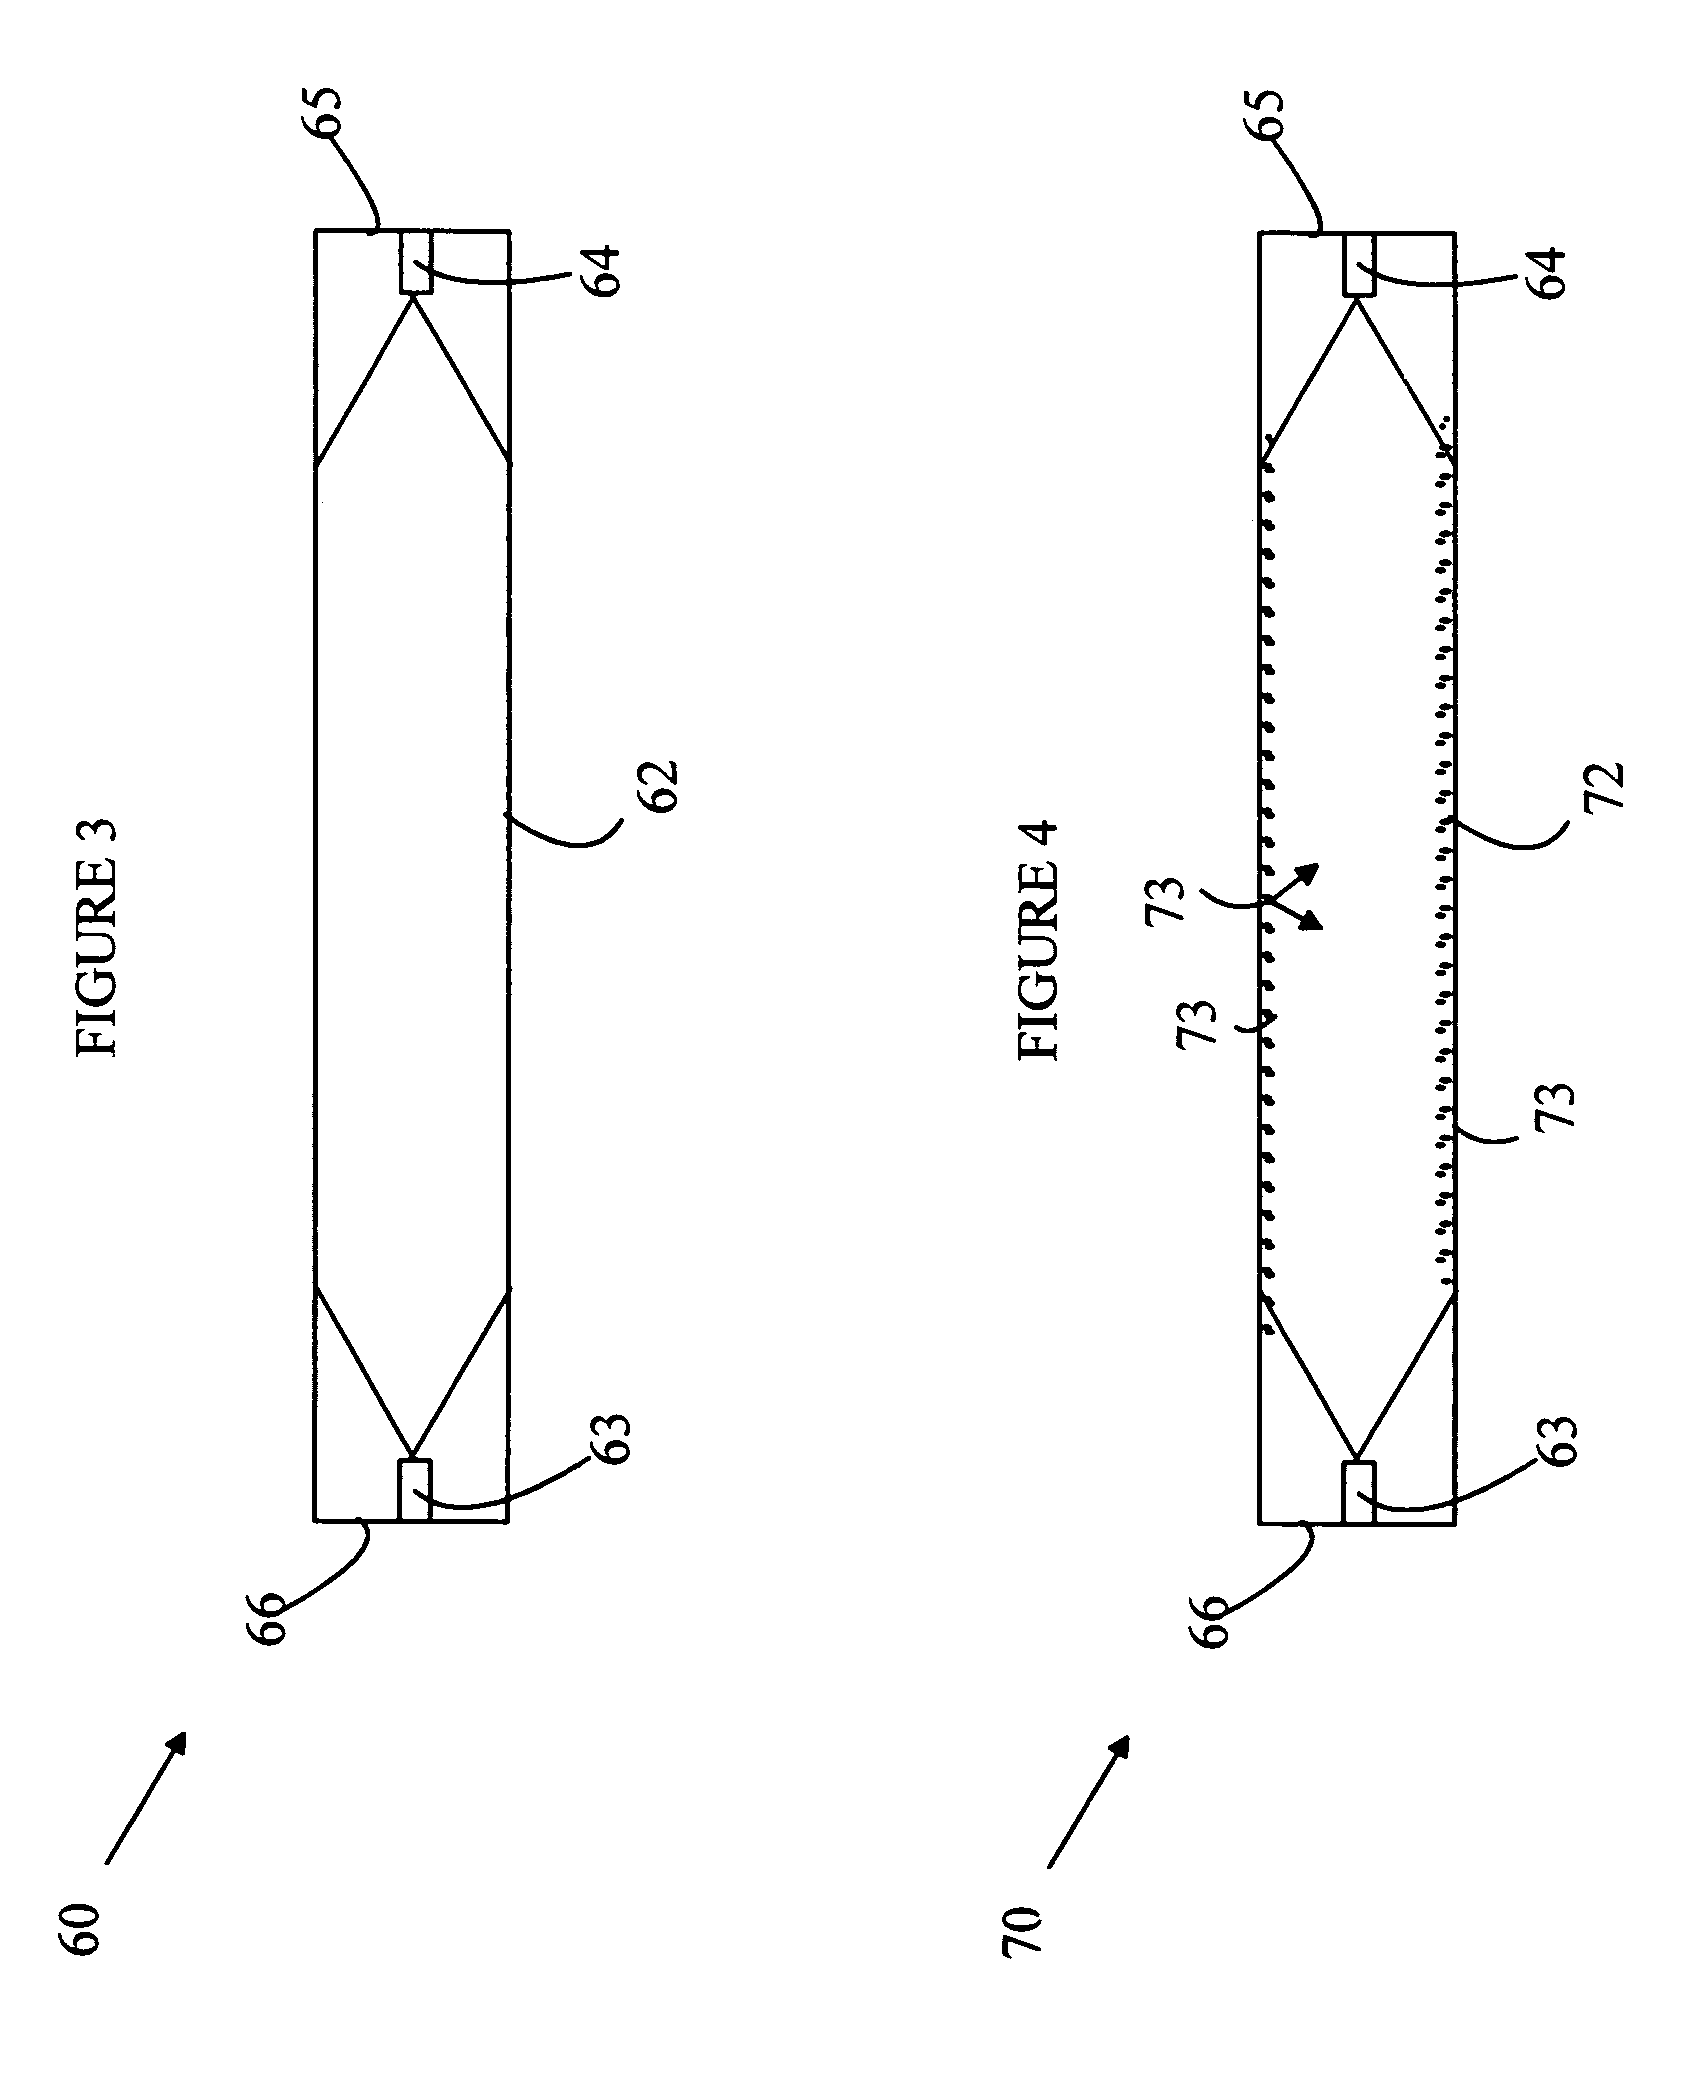 Semiconductor light source configured as a light tube